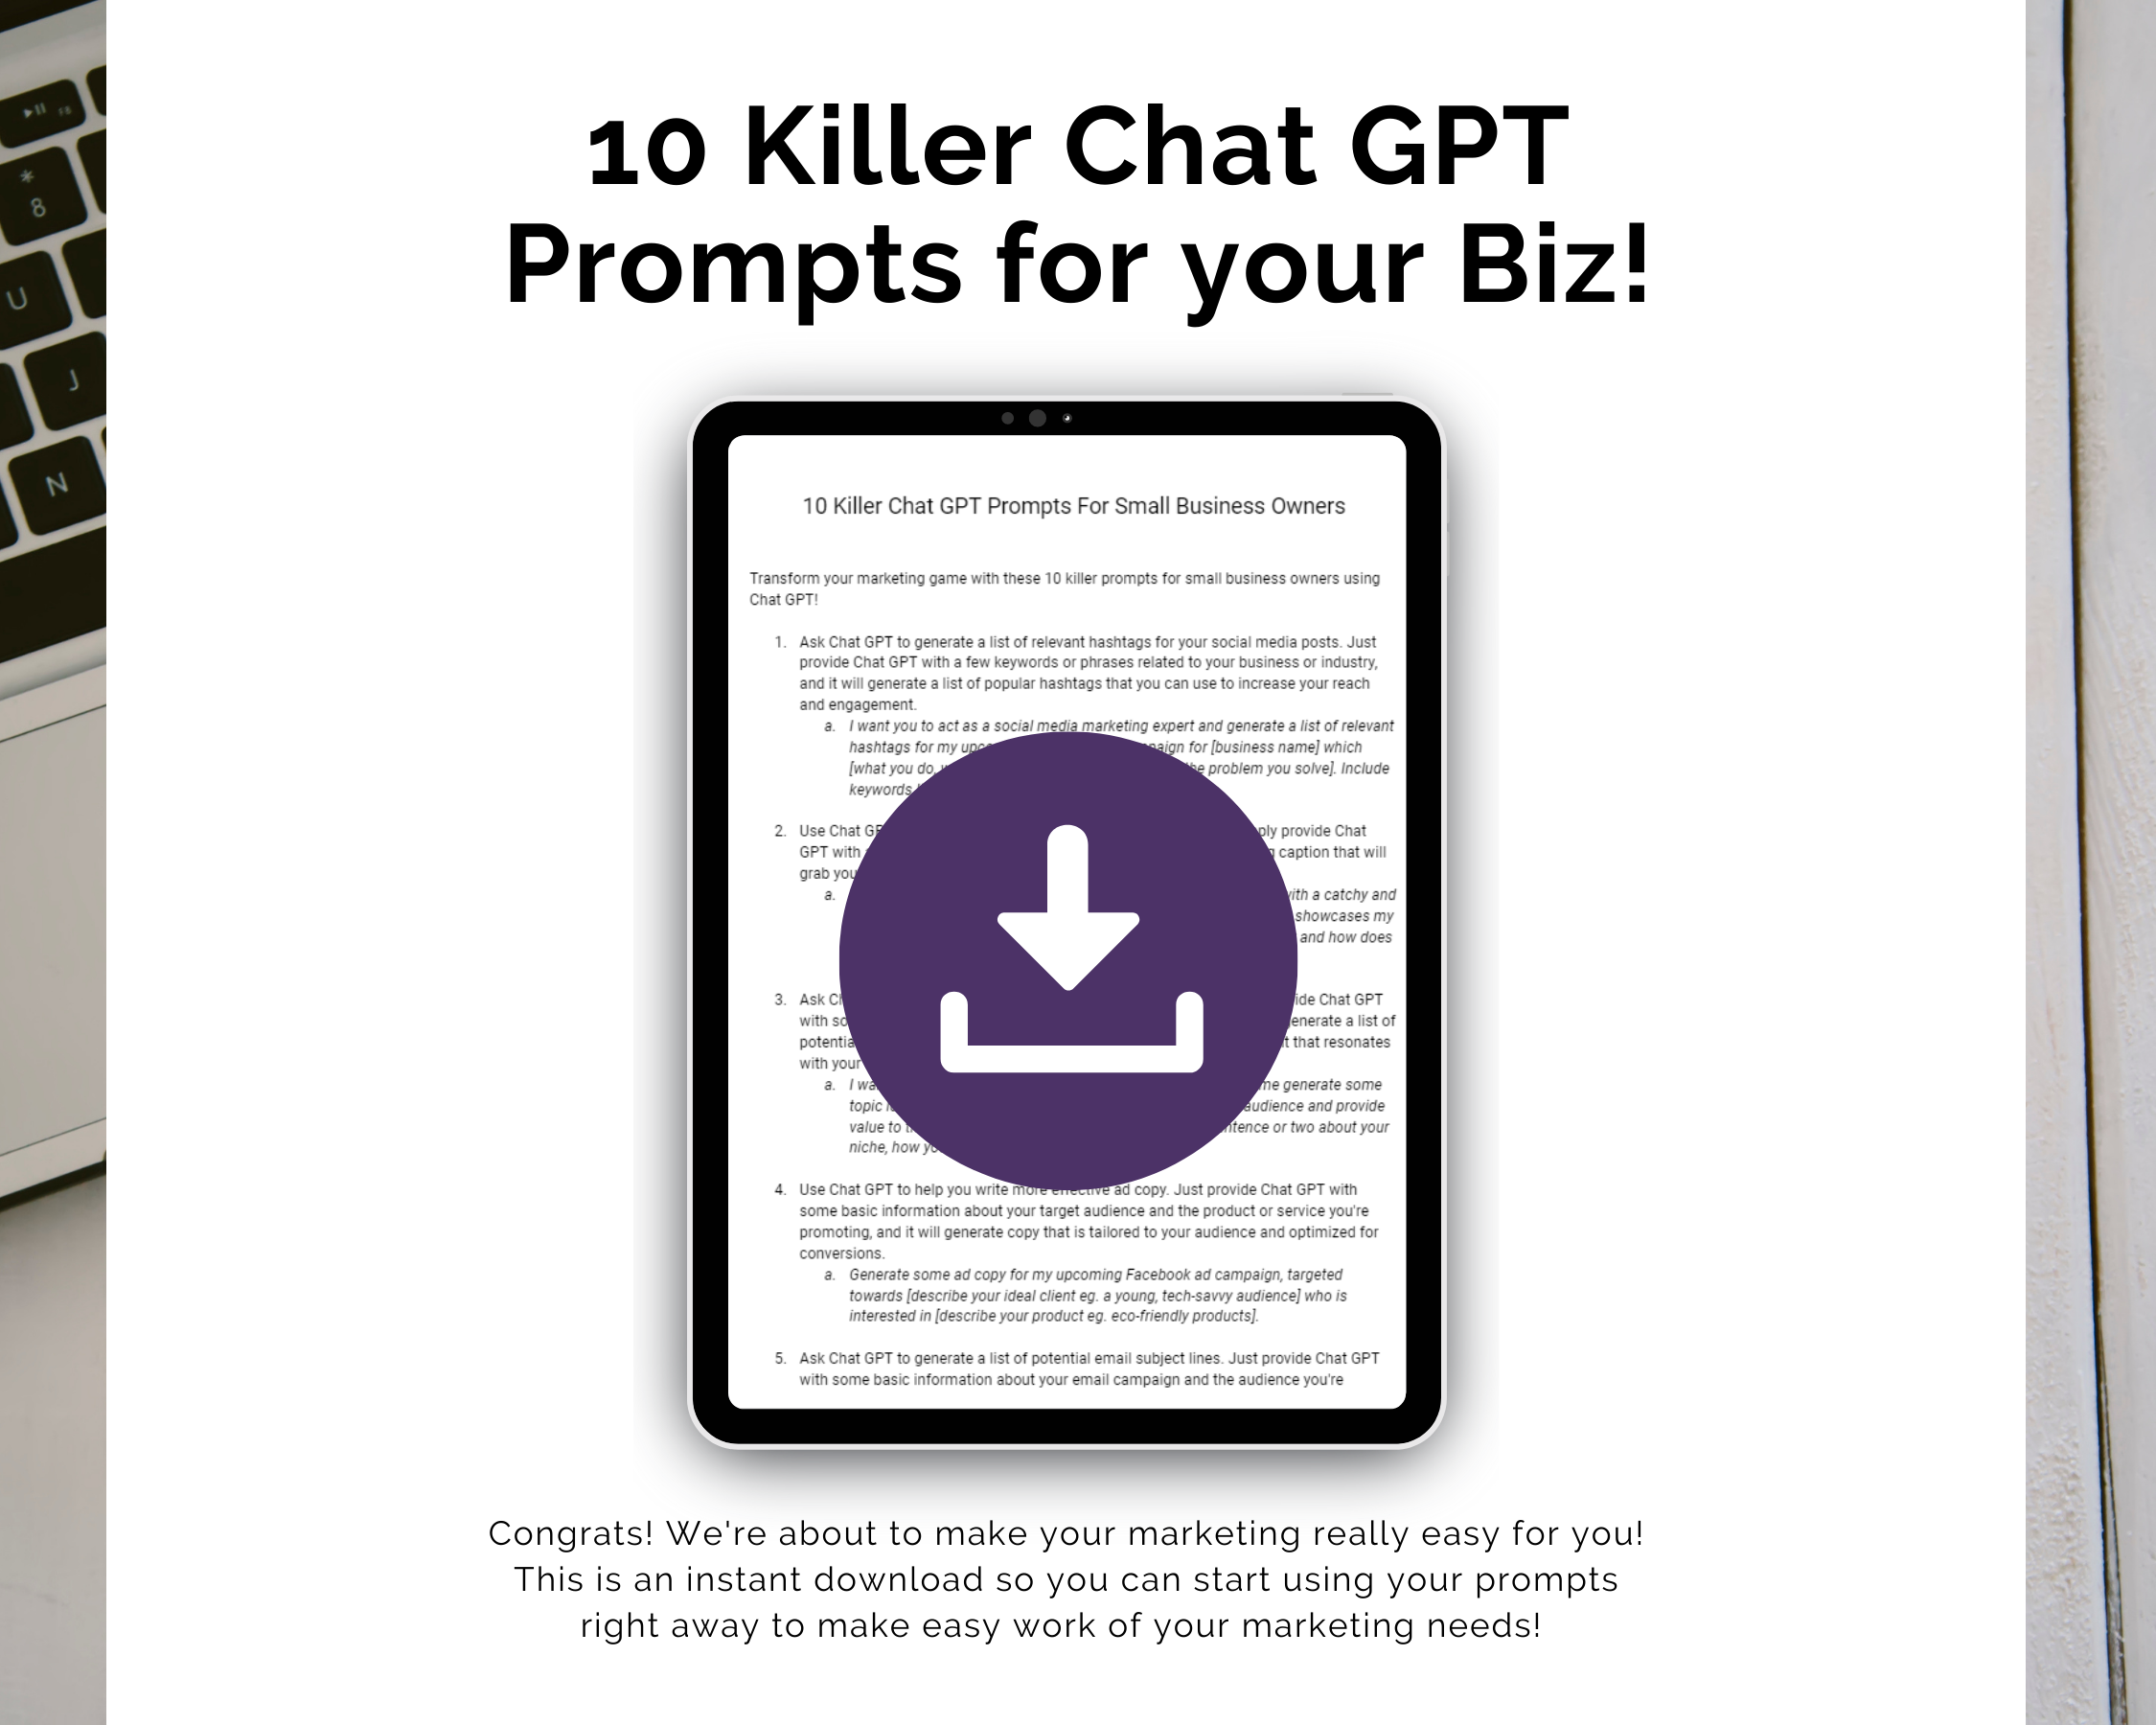 Chat GPT Marketing 101: The Essential Course for Small Business Owners